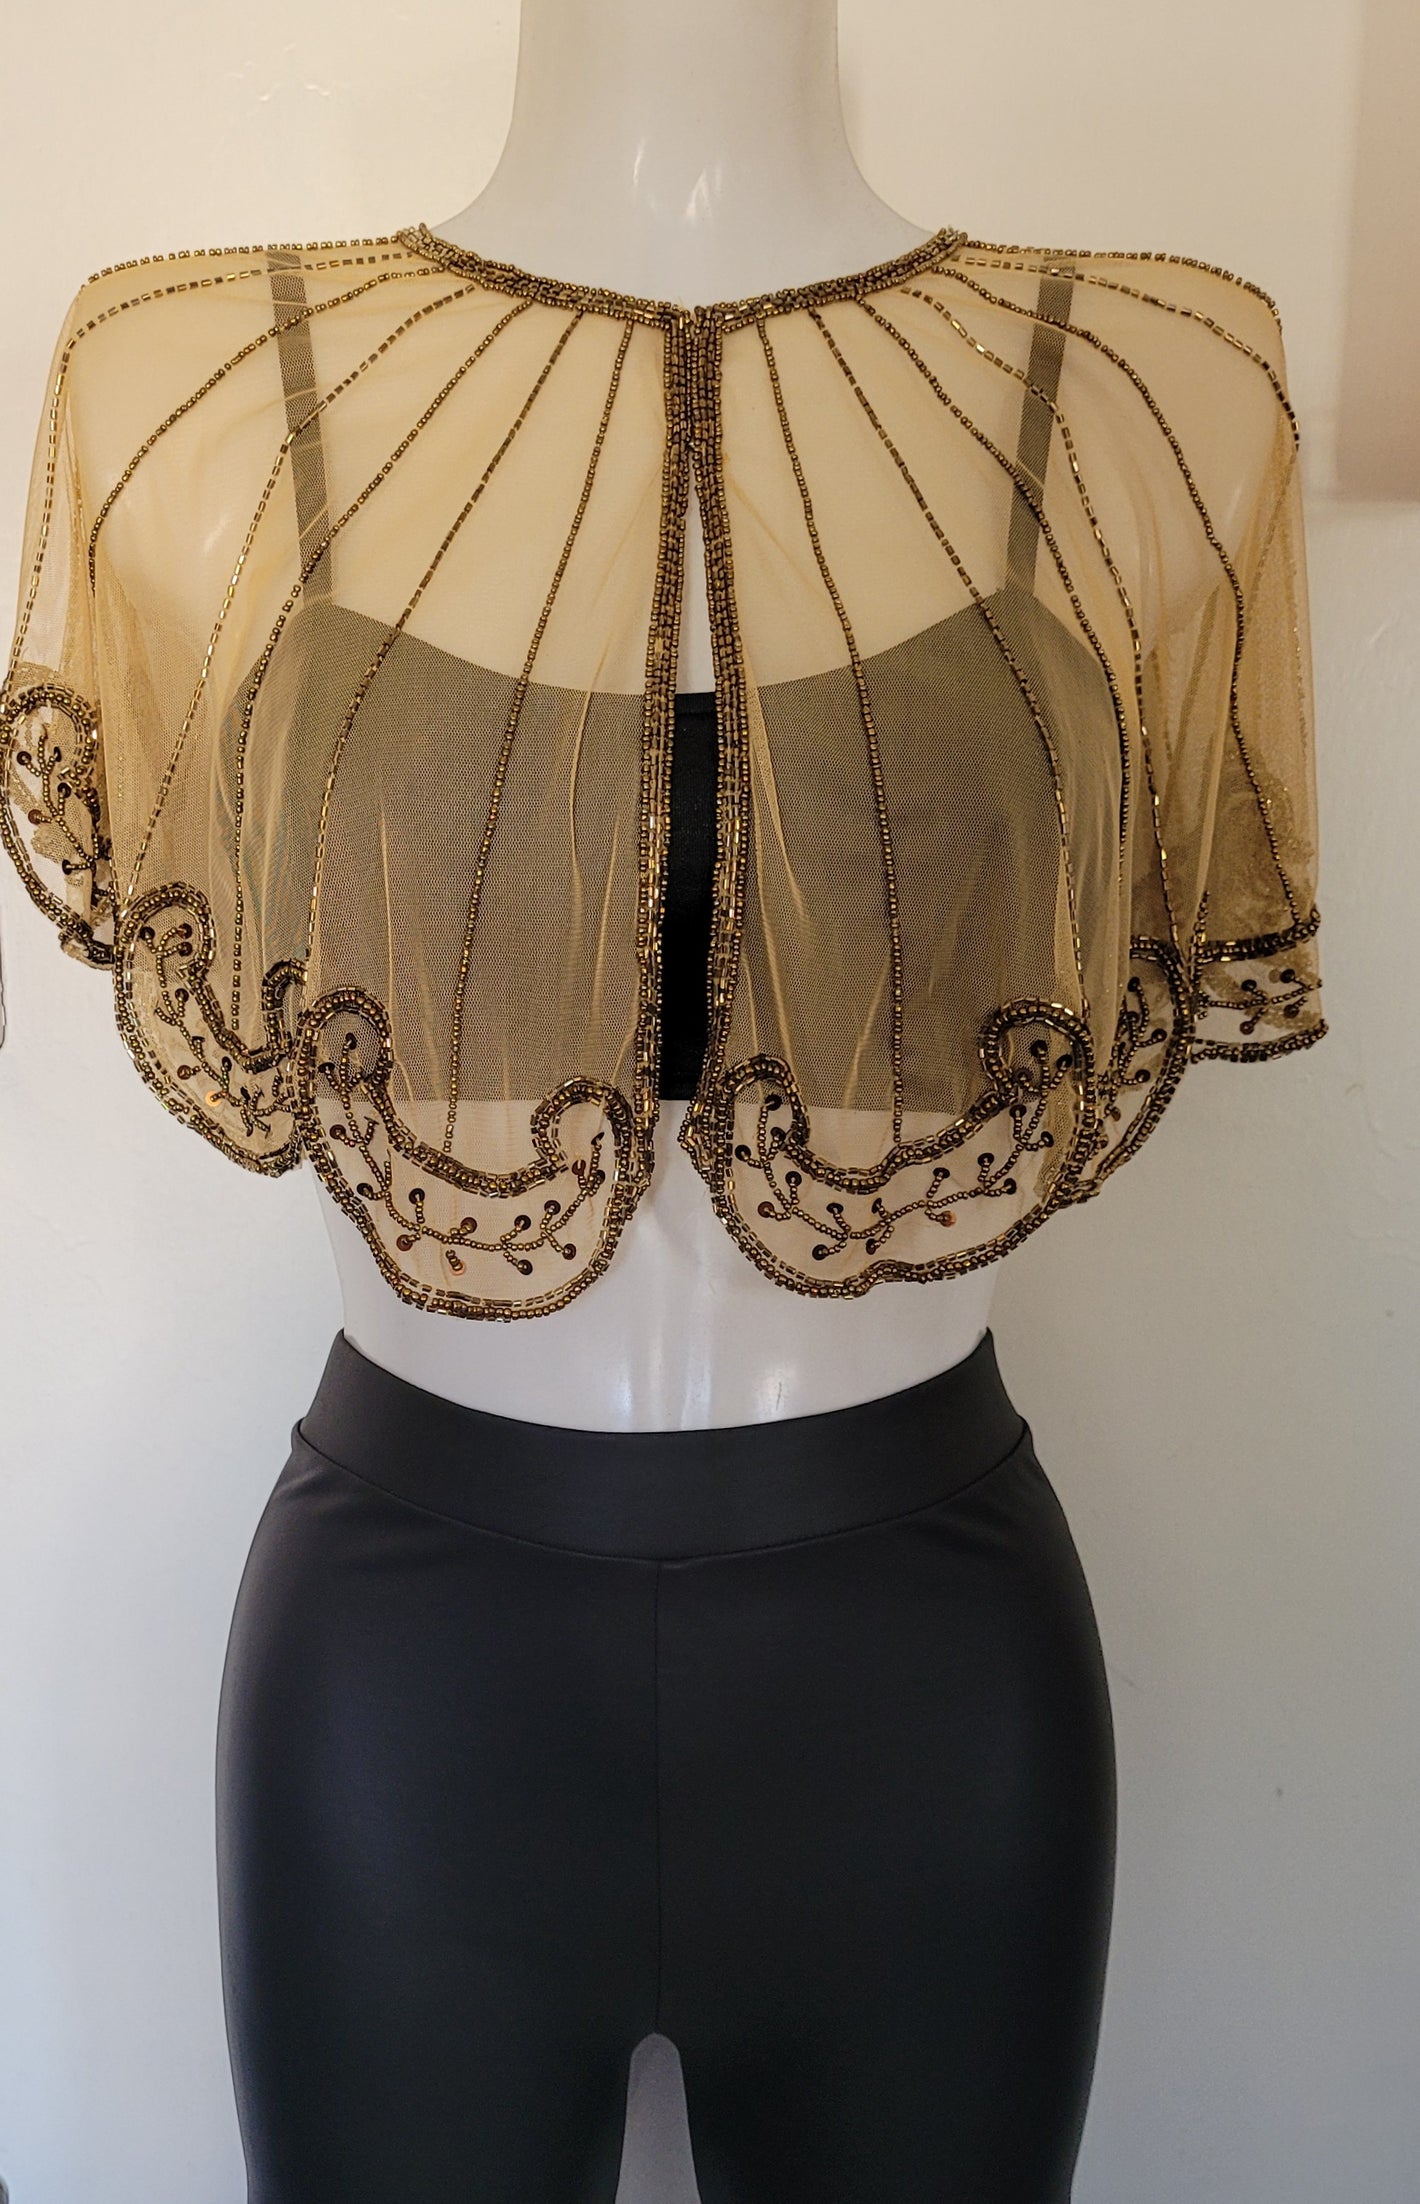 Bolero capelet with gold beads all over. Inspired in Gatsby 1920's . Really romantic style and beautiful short cape. Hand made embroidery .One size only. Art Deco cape embellished with gold beads, sequins with hook and eye button. Round neck.